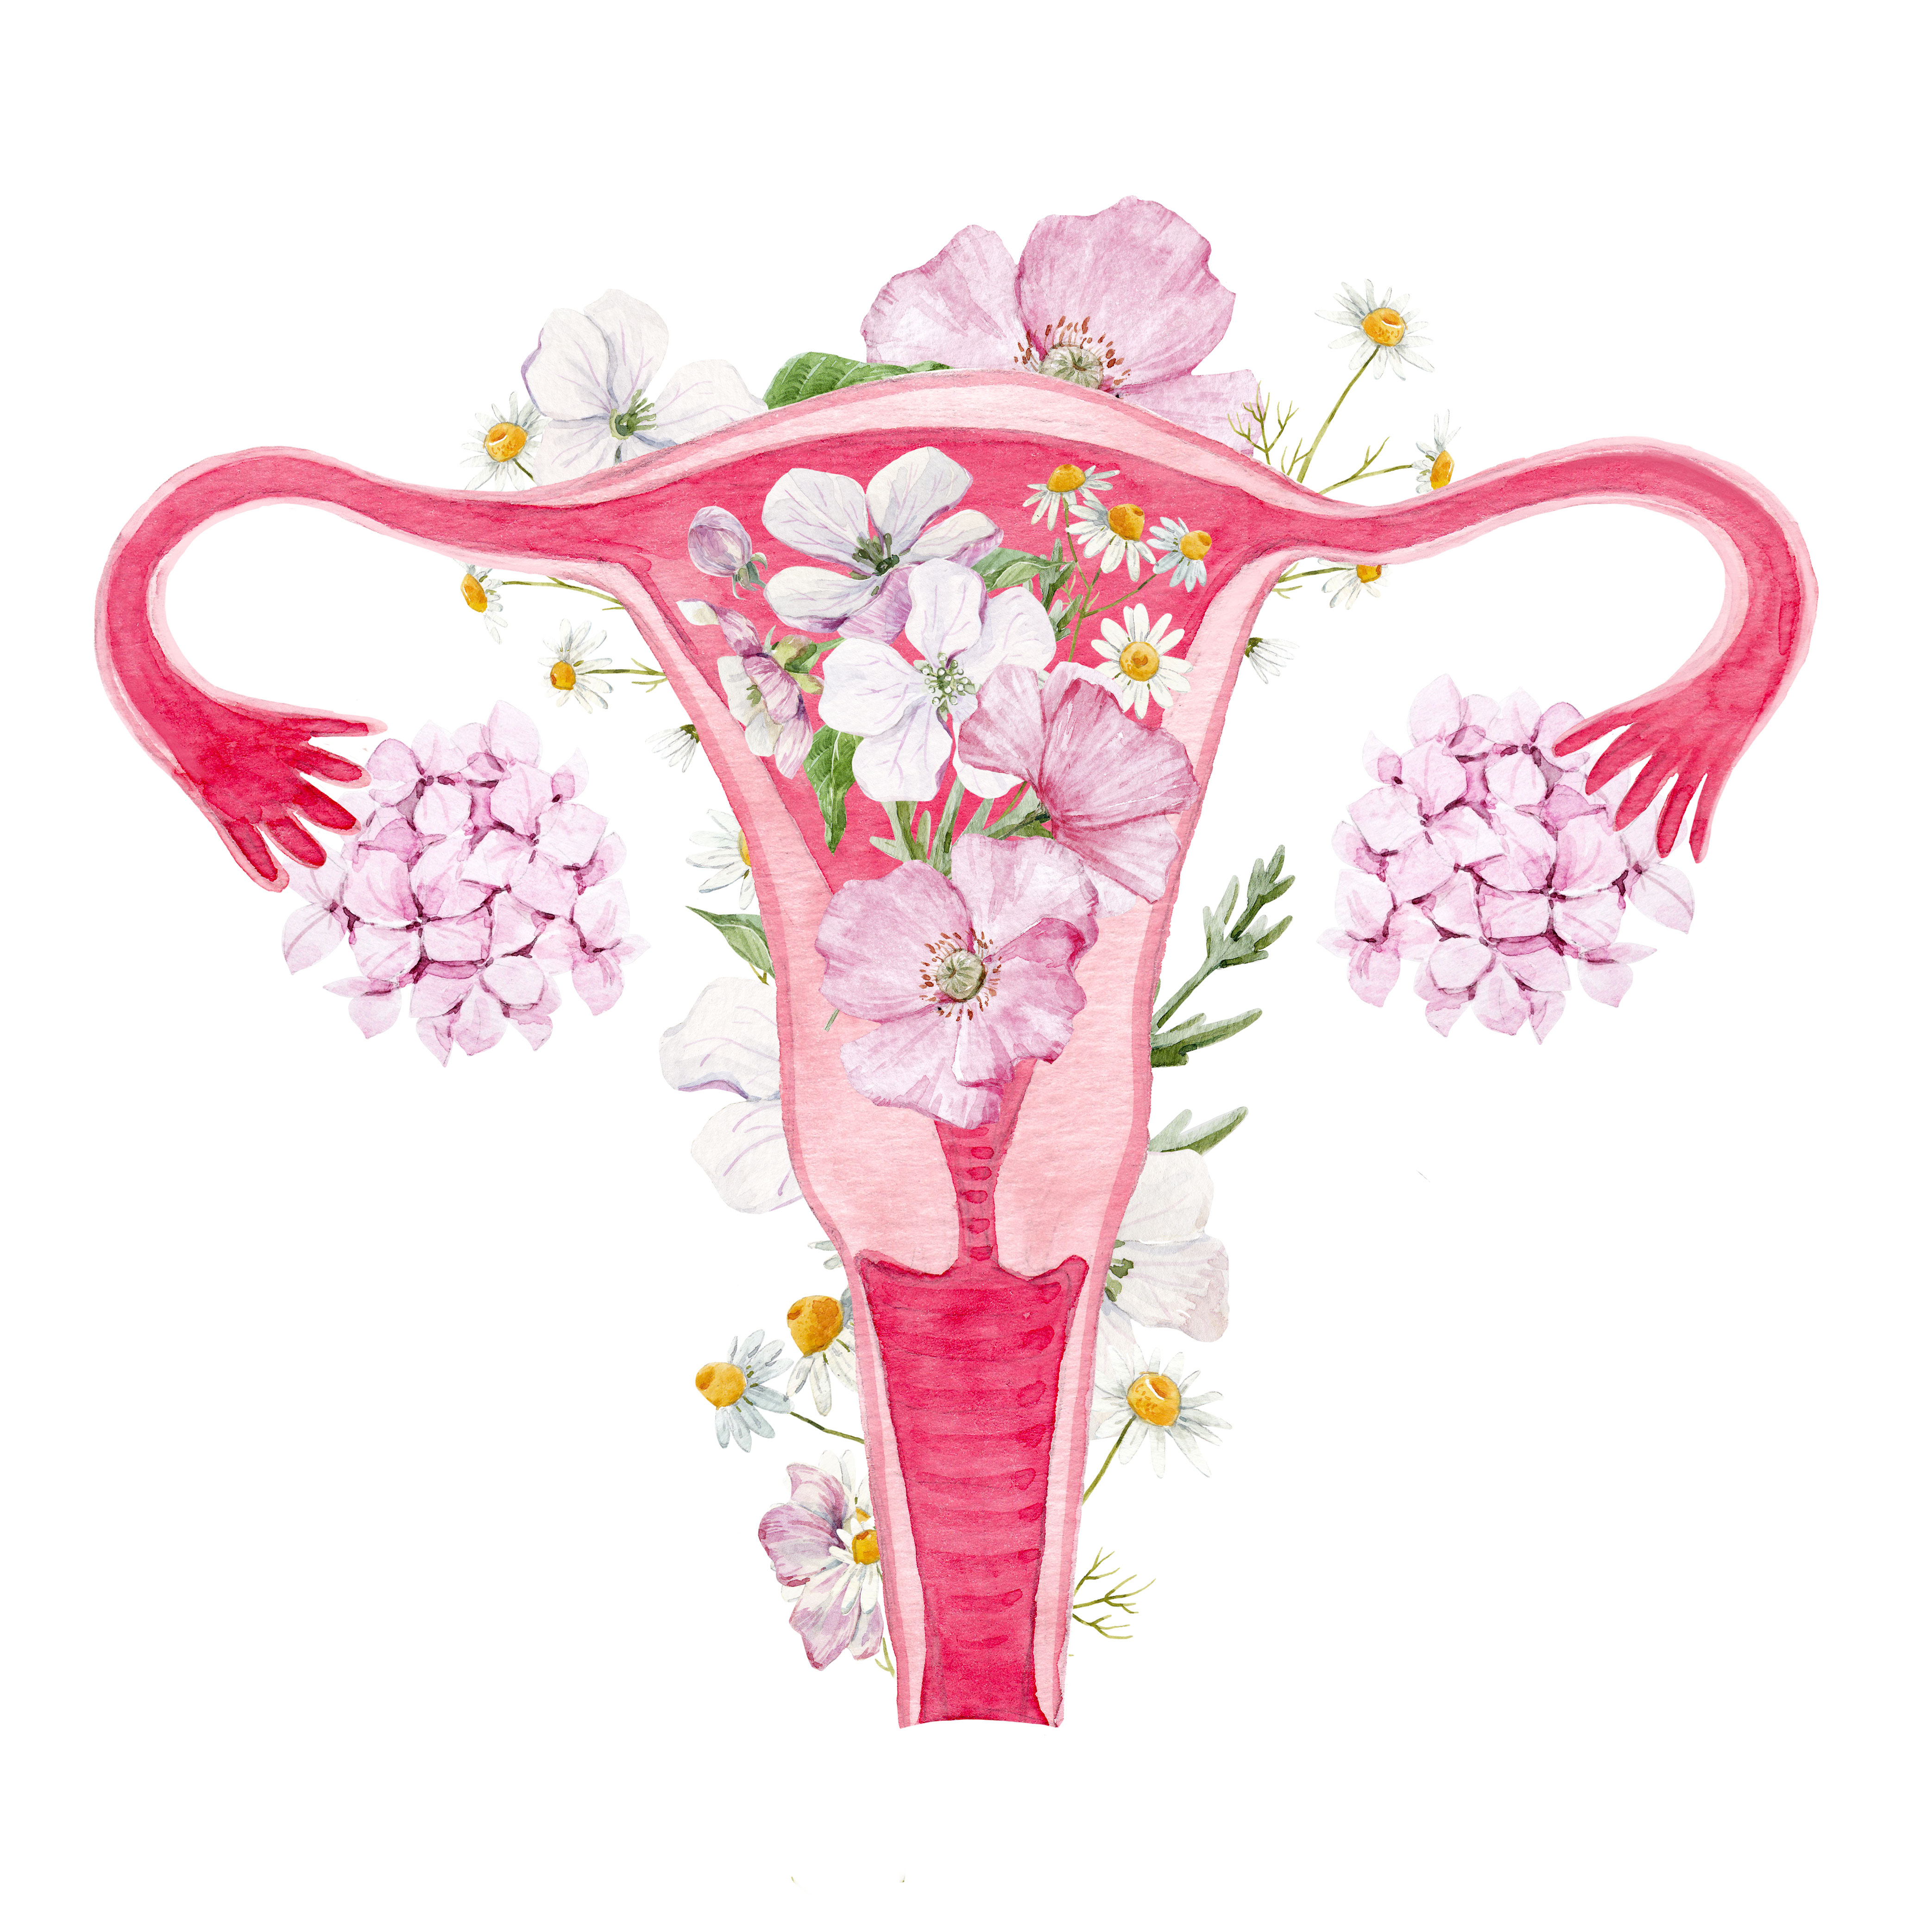 Beautiful drawing of a pink womb with flowers